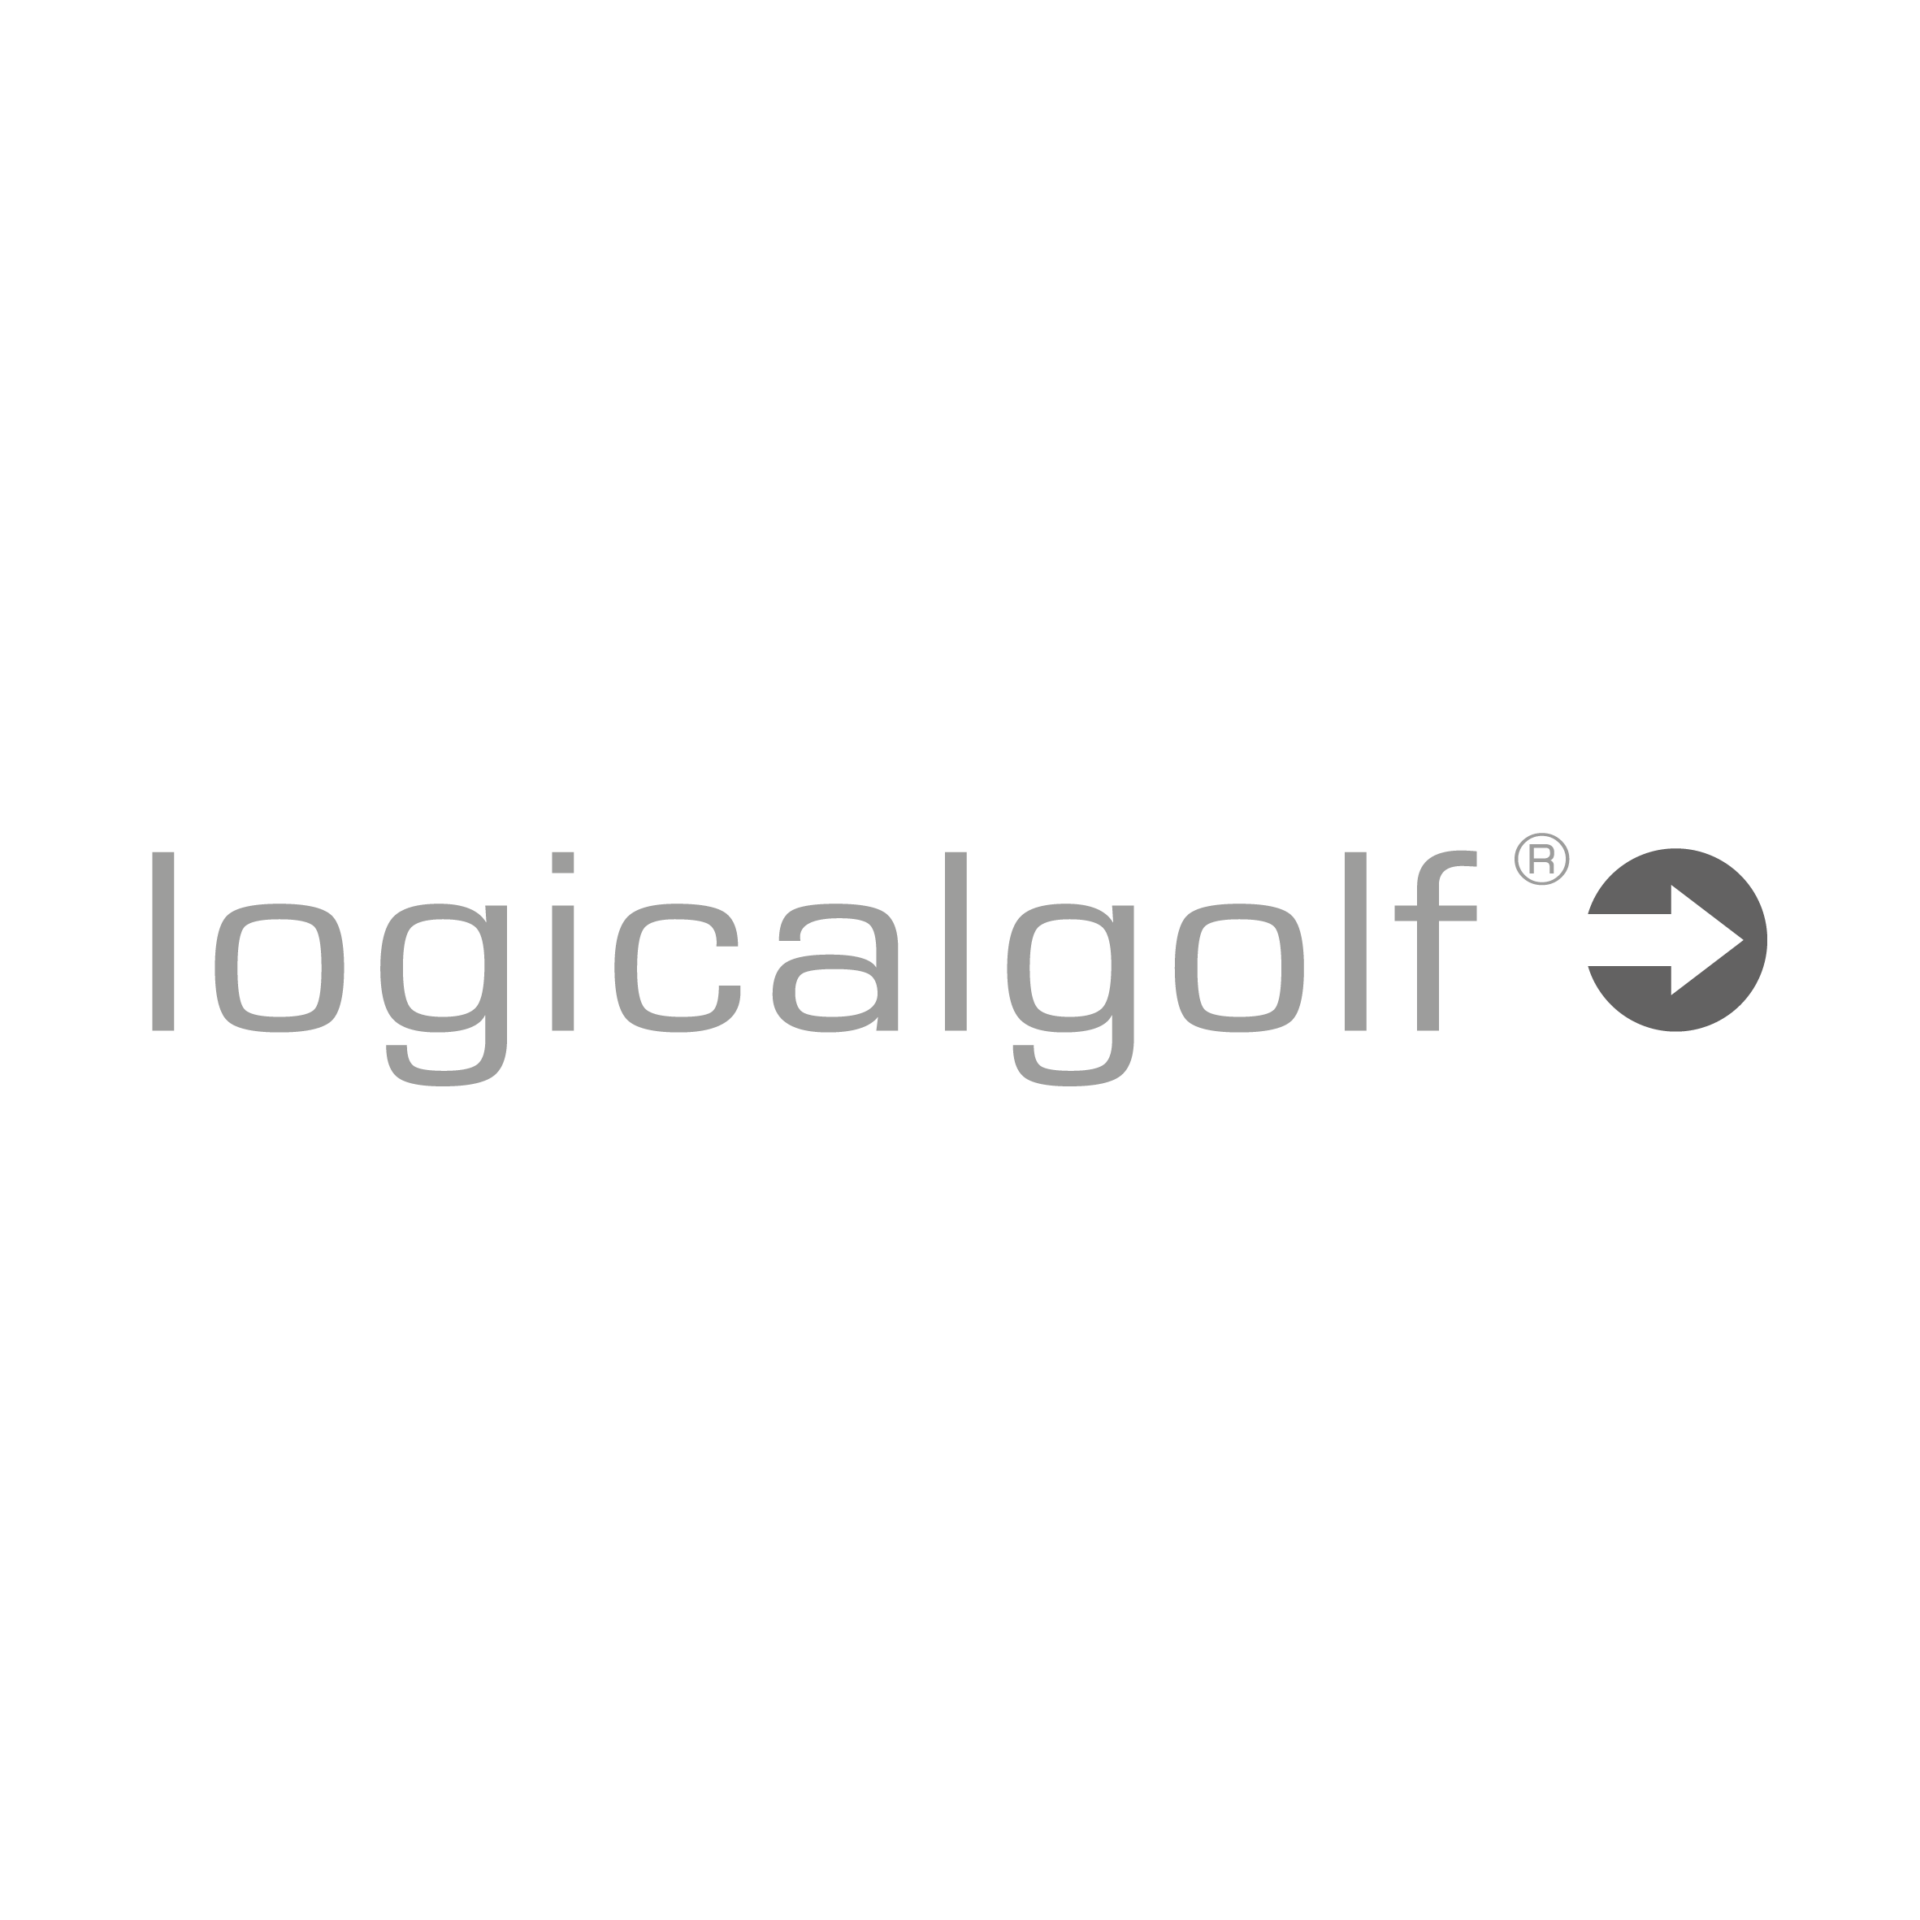 logicalgolf - mga Physiotherapie & Osteopathie